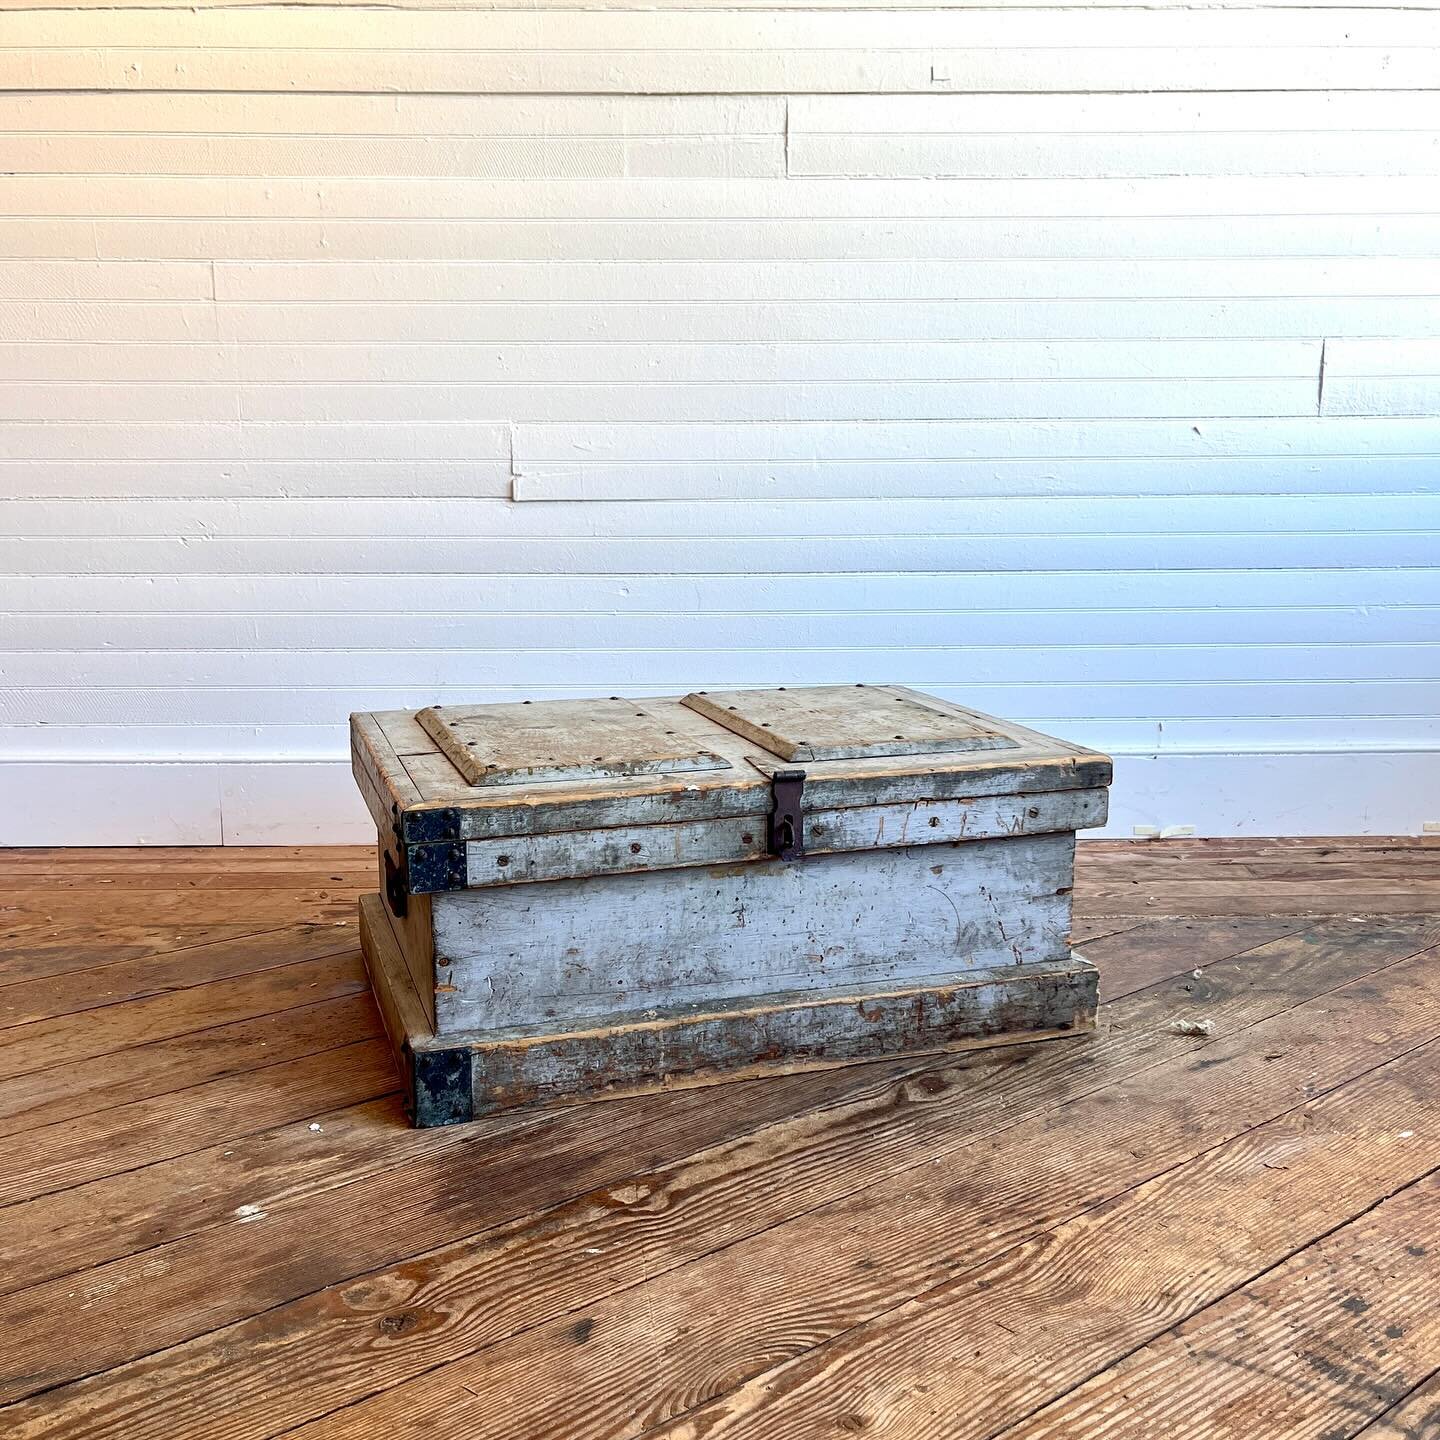 Antique pale blue trunk.  Overall wear, hole drilled through back for cable wires.

12&rdquo;t x 28&rdquo;l x 20.75d

$185 DM to purchase